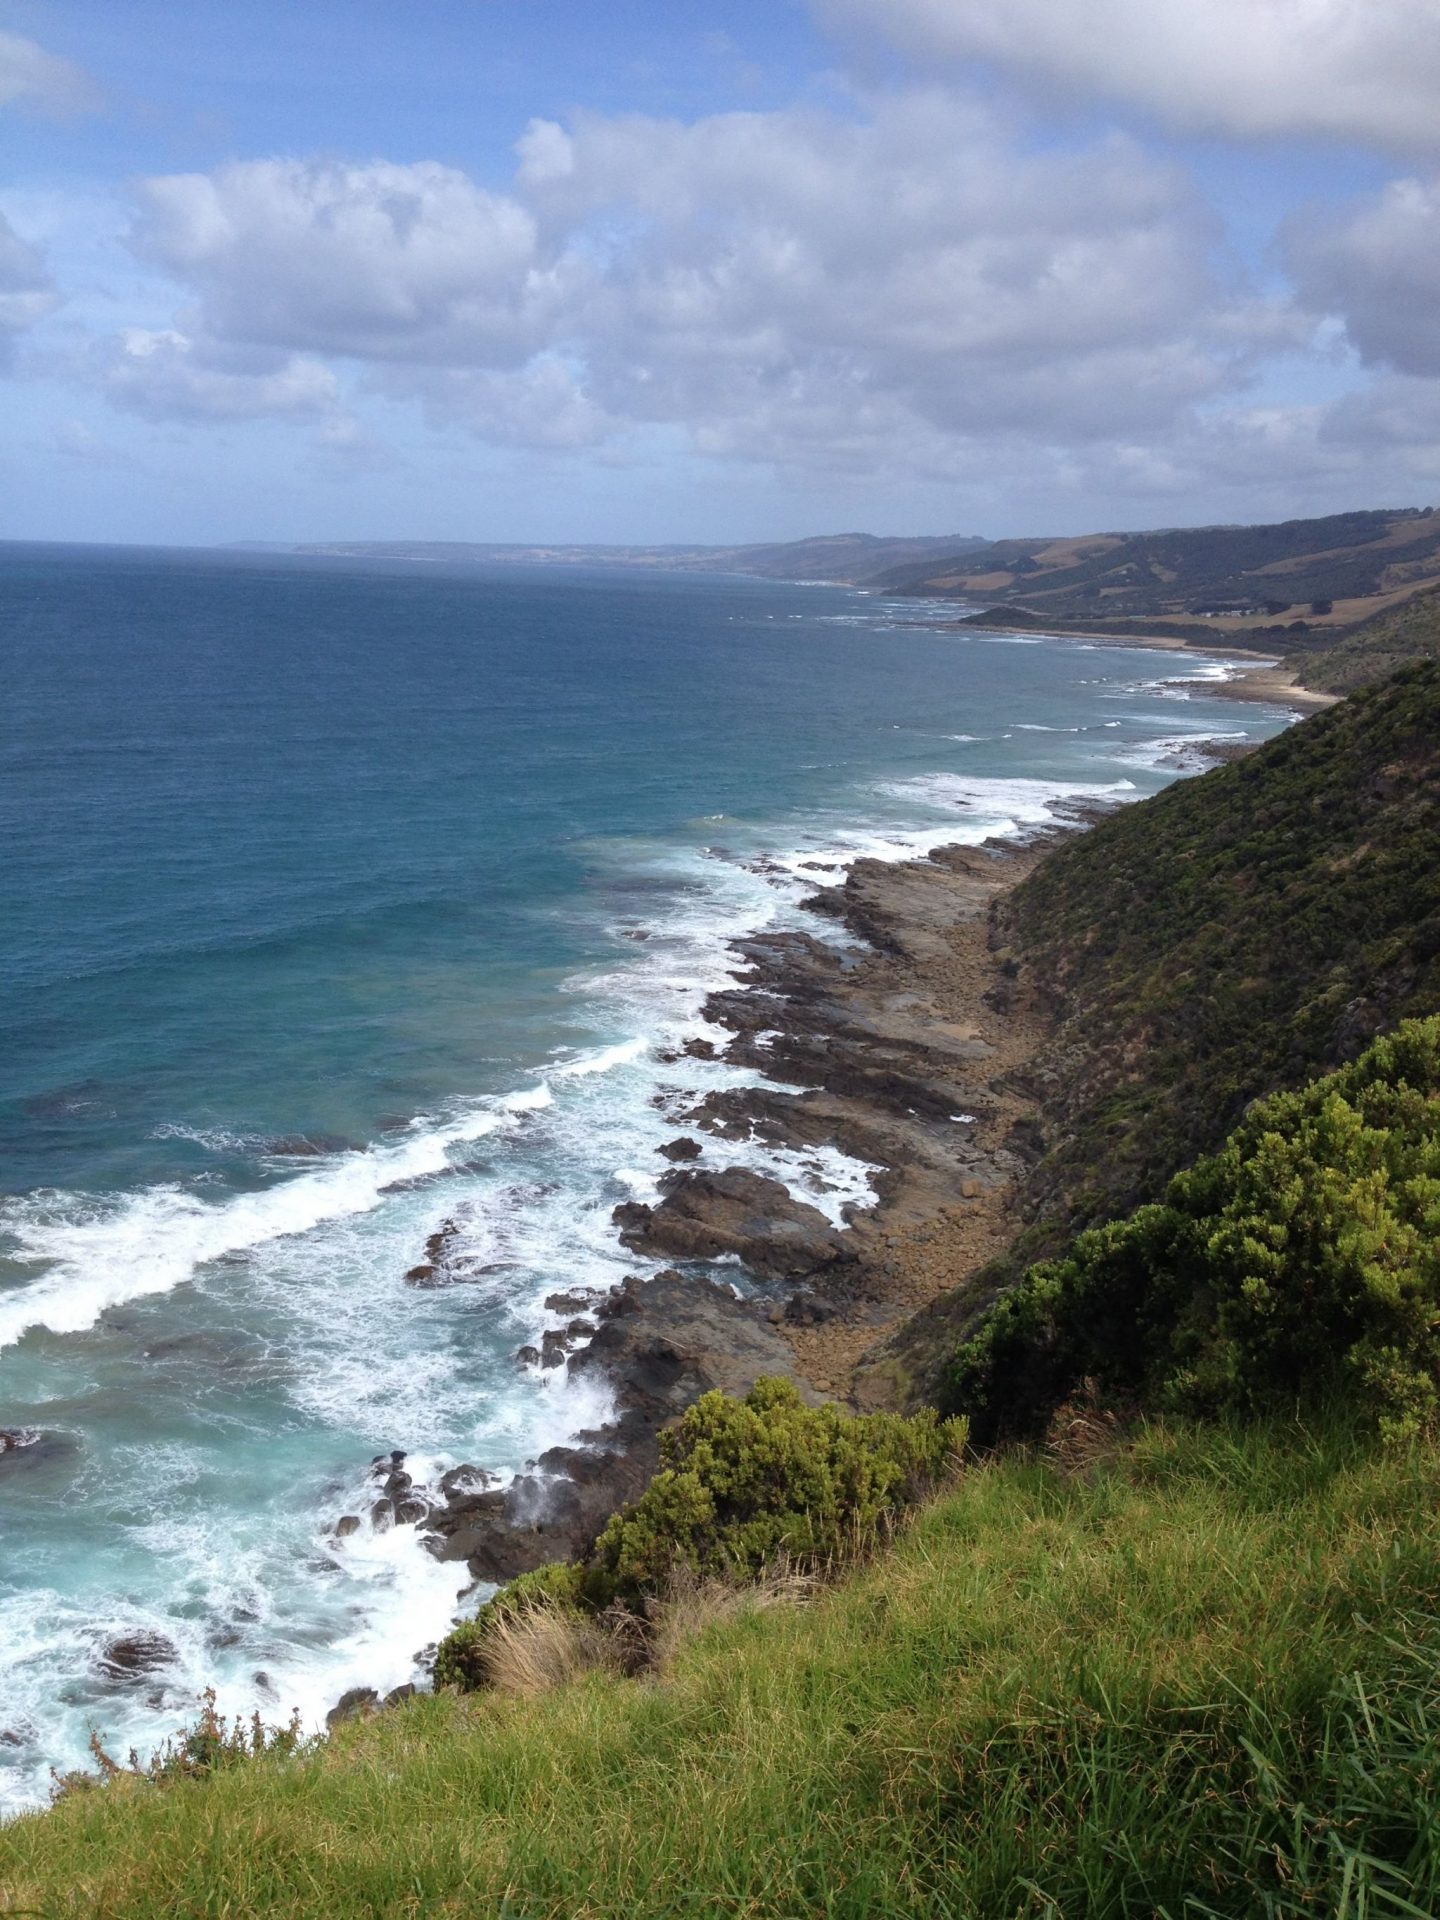 Coastal views from the Great Ocean Road